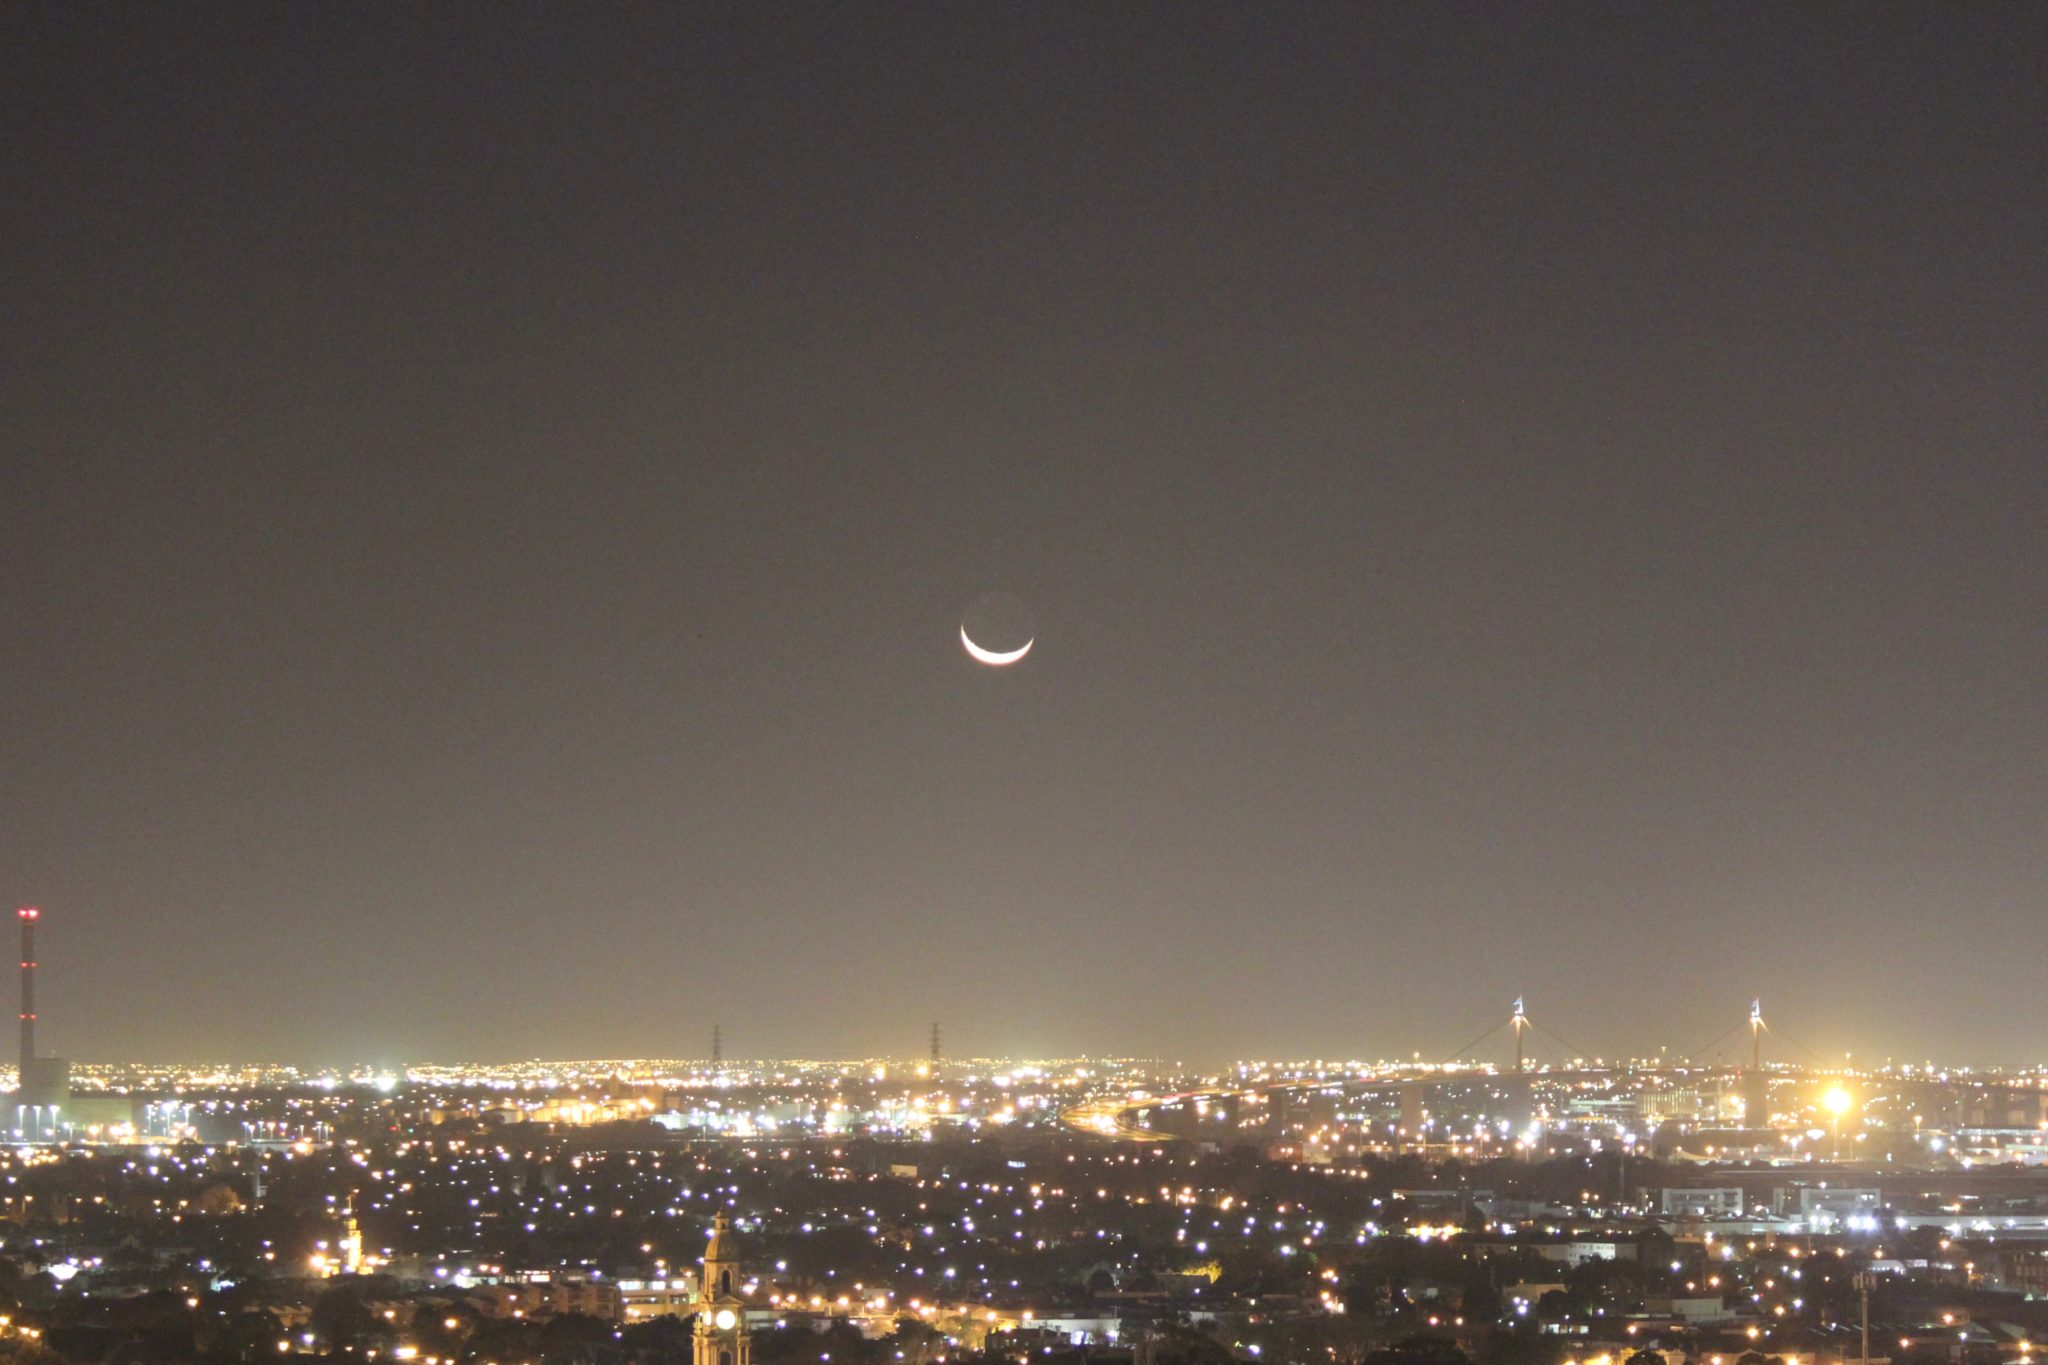 The Eid moon rises over Melbourne's west at the end of Ramadan 2014.